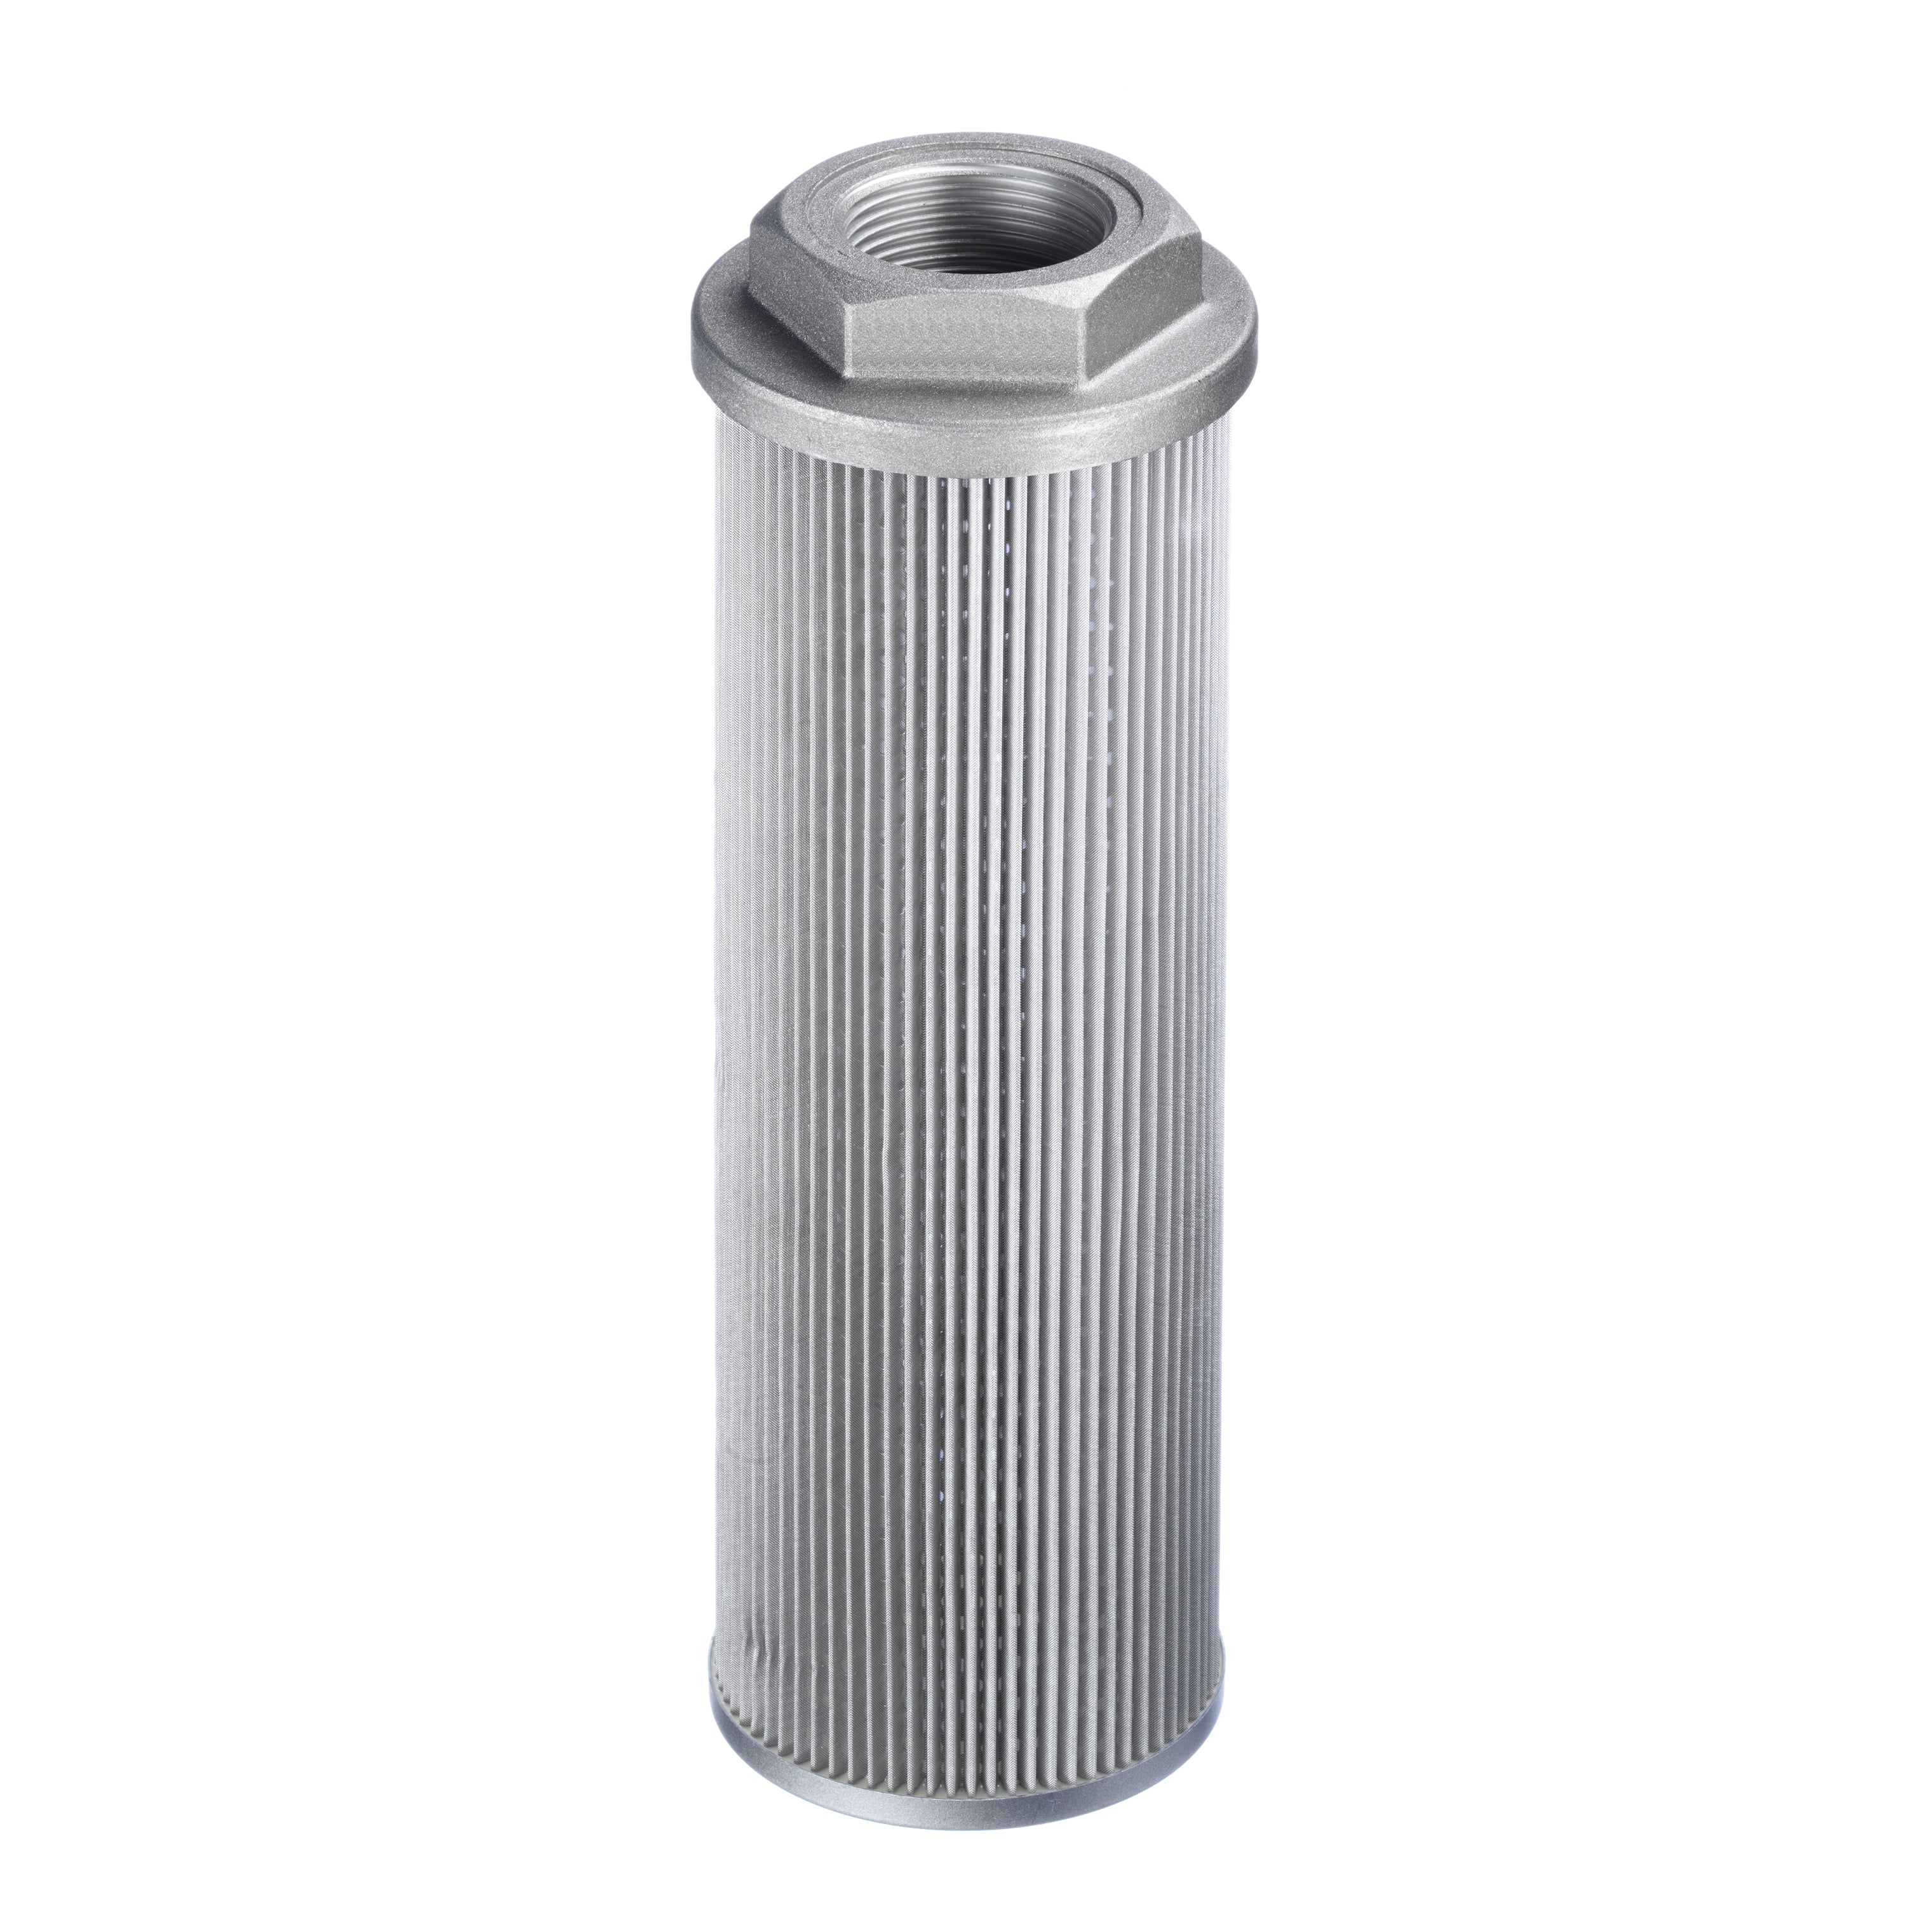 SUS-088-N24-226-125-A-O : Stauff Suction Strainer, Aluminum End Cap, 1.5" NPT, 36.4GPM, 125 Micron, No Bypass